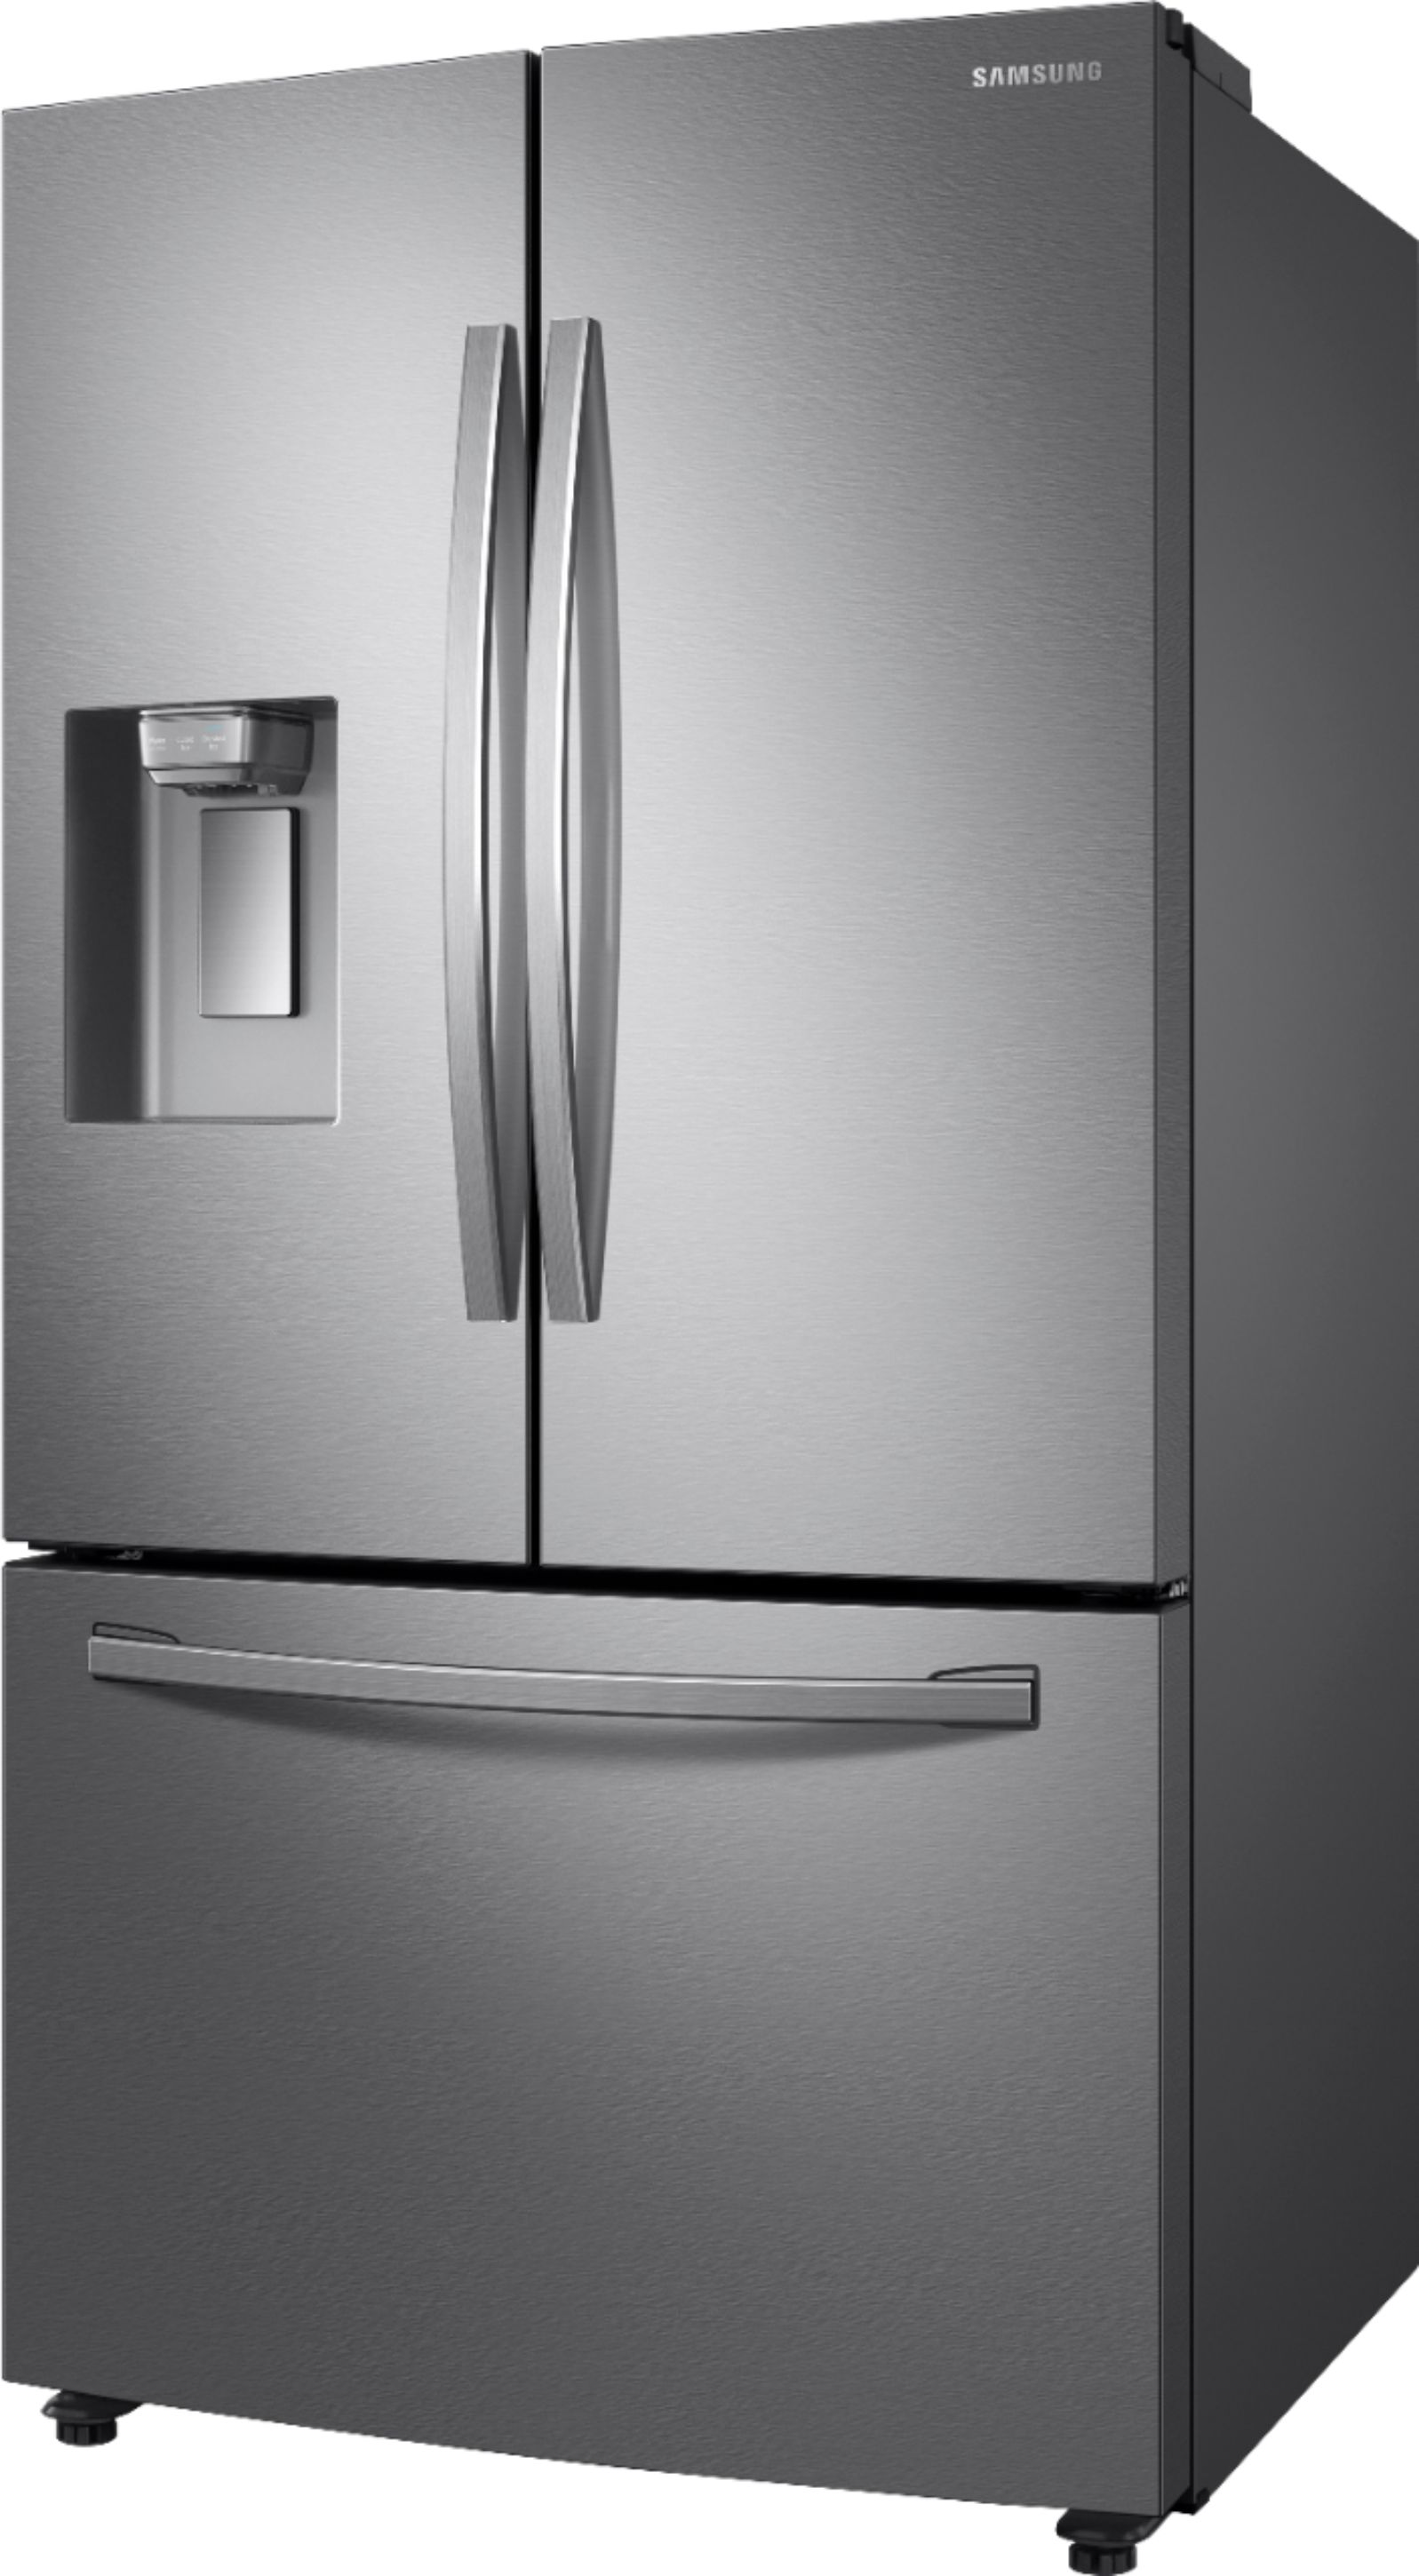 Left View: Sub-Zero - Classic 24.2 Cu. Ft. French Door Built-In Refrigerator with Internal Dispenser - Stainless steel